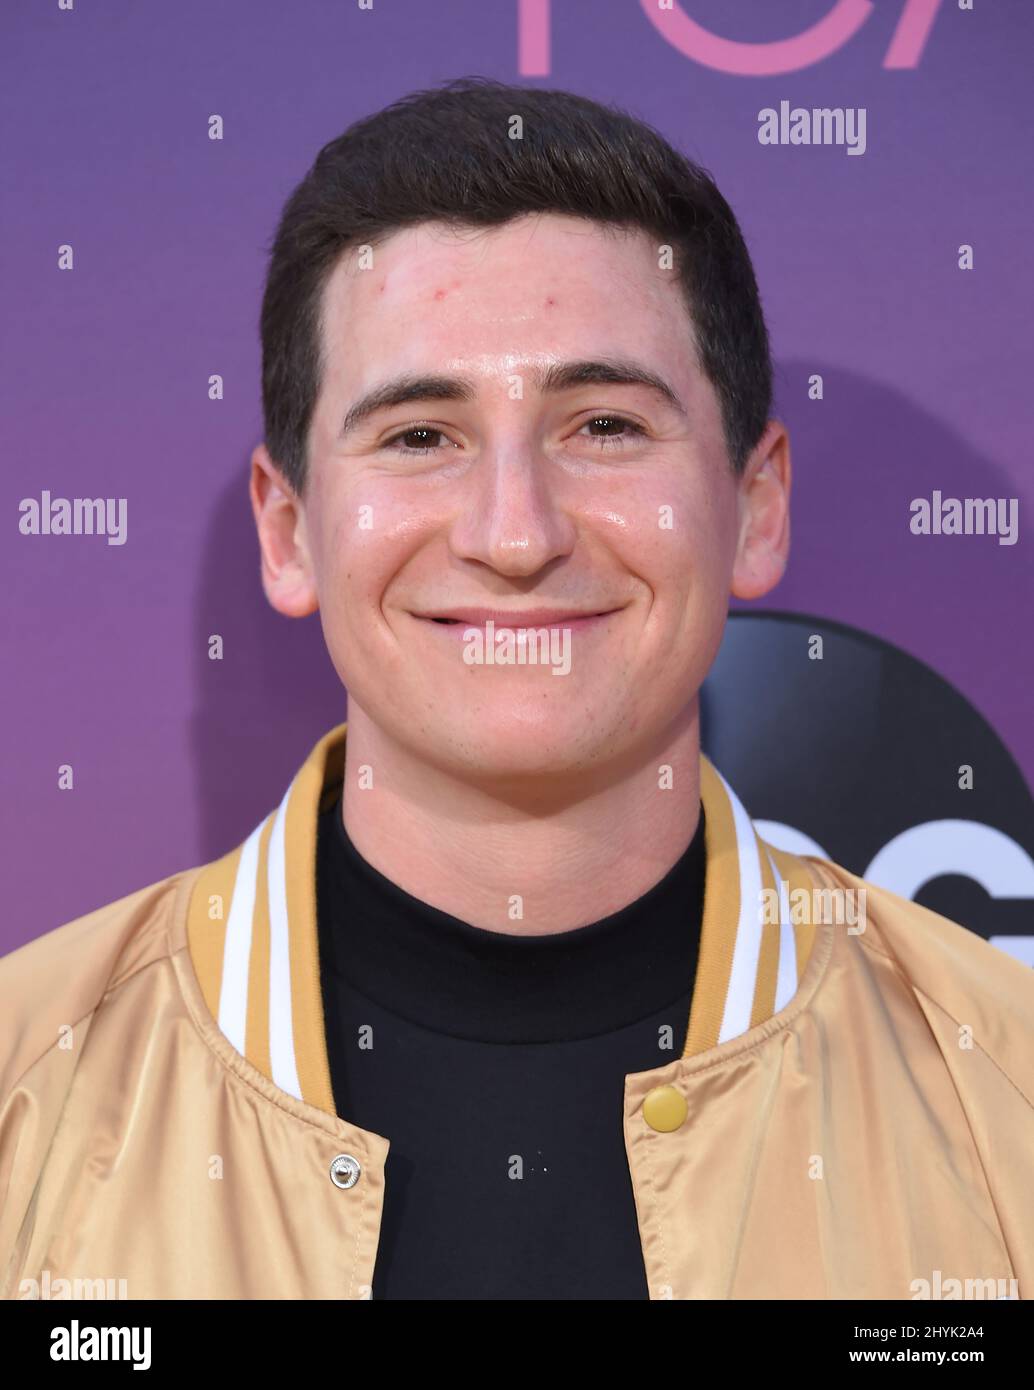 Sam Lerner arriving to the ABC's TCA Summer Press Tour Carpet Event at Soho House on August 05, 2019 in West Hollywood, Los Angeles. Stock Photo